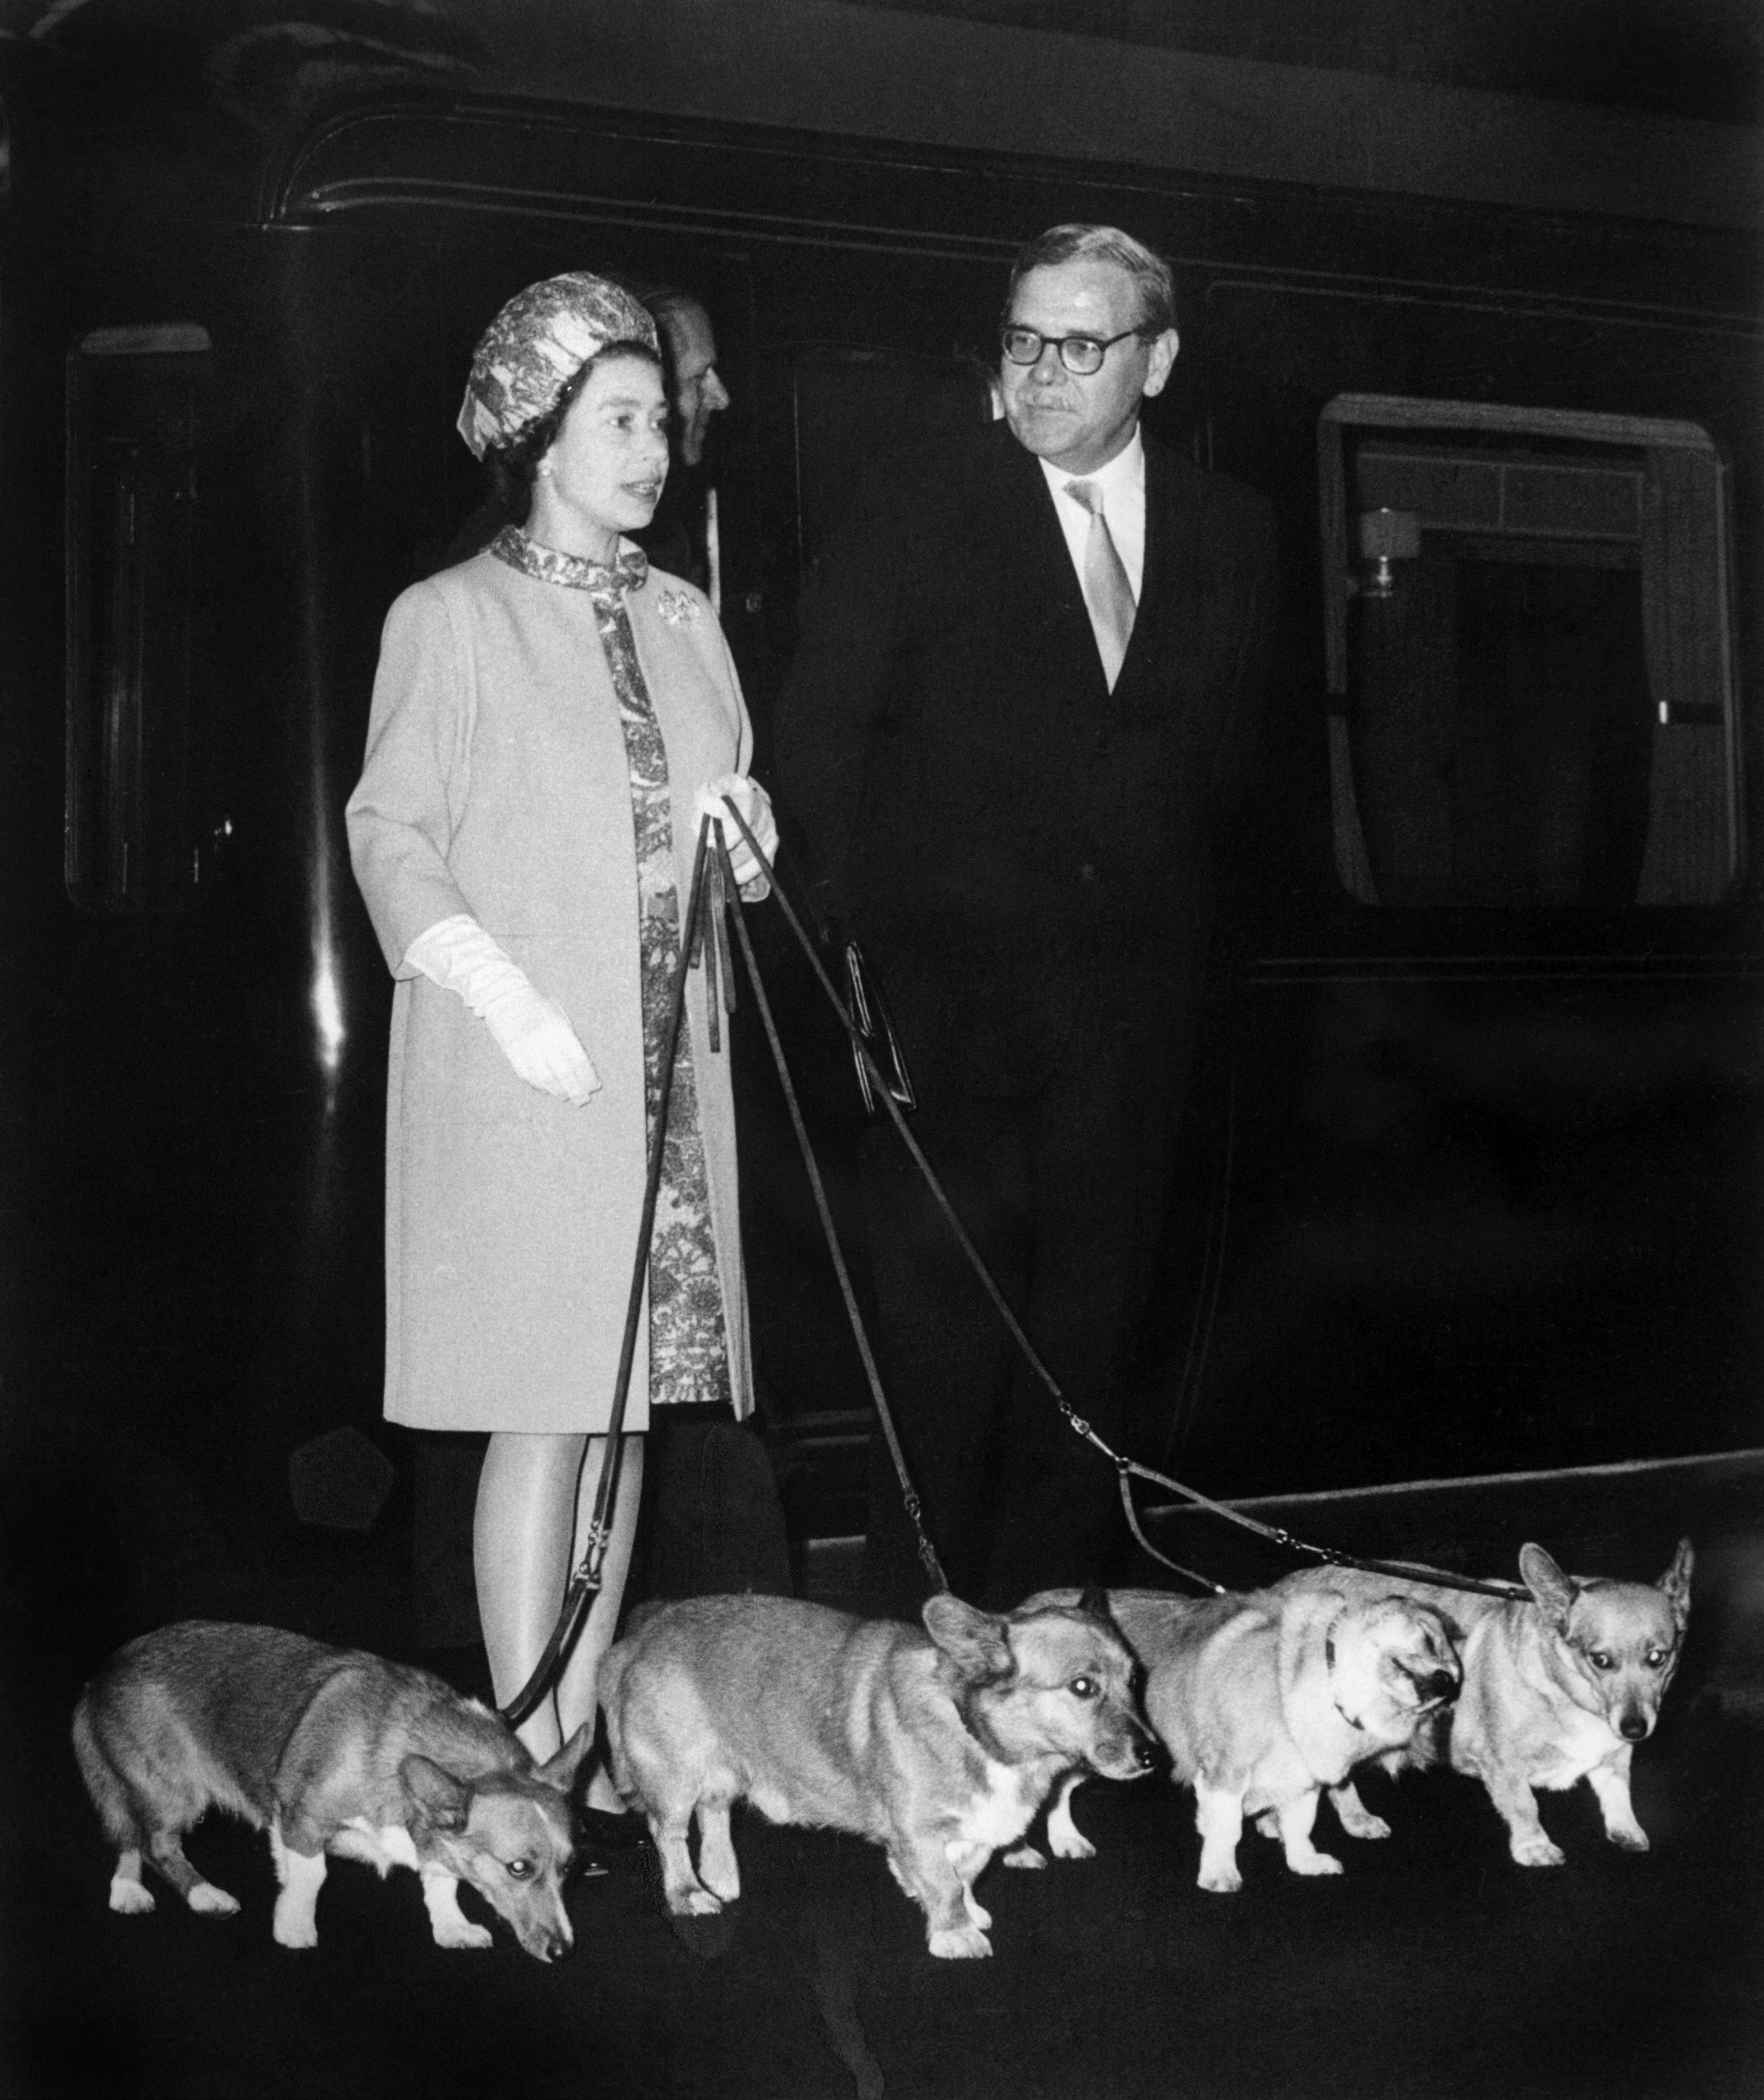 The Queen has owned more than 30 corgis during her lifetime